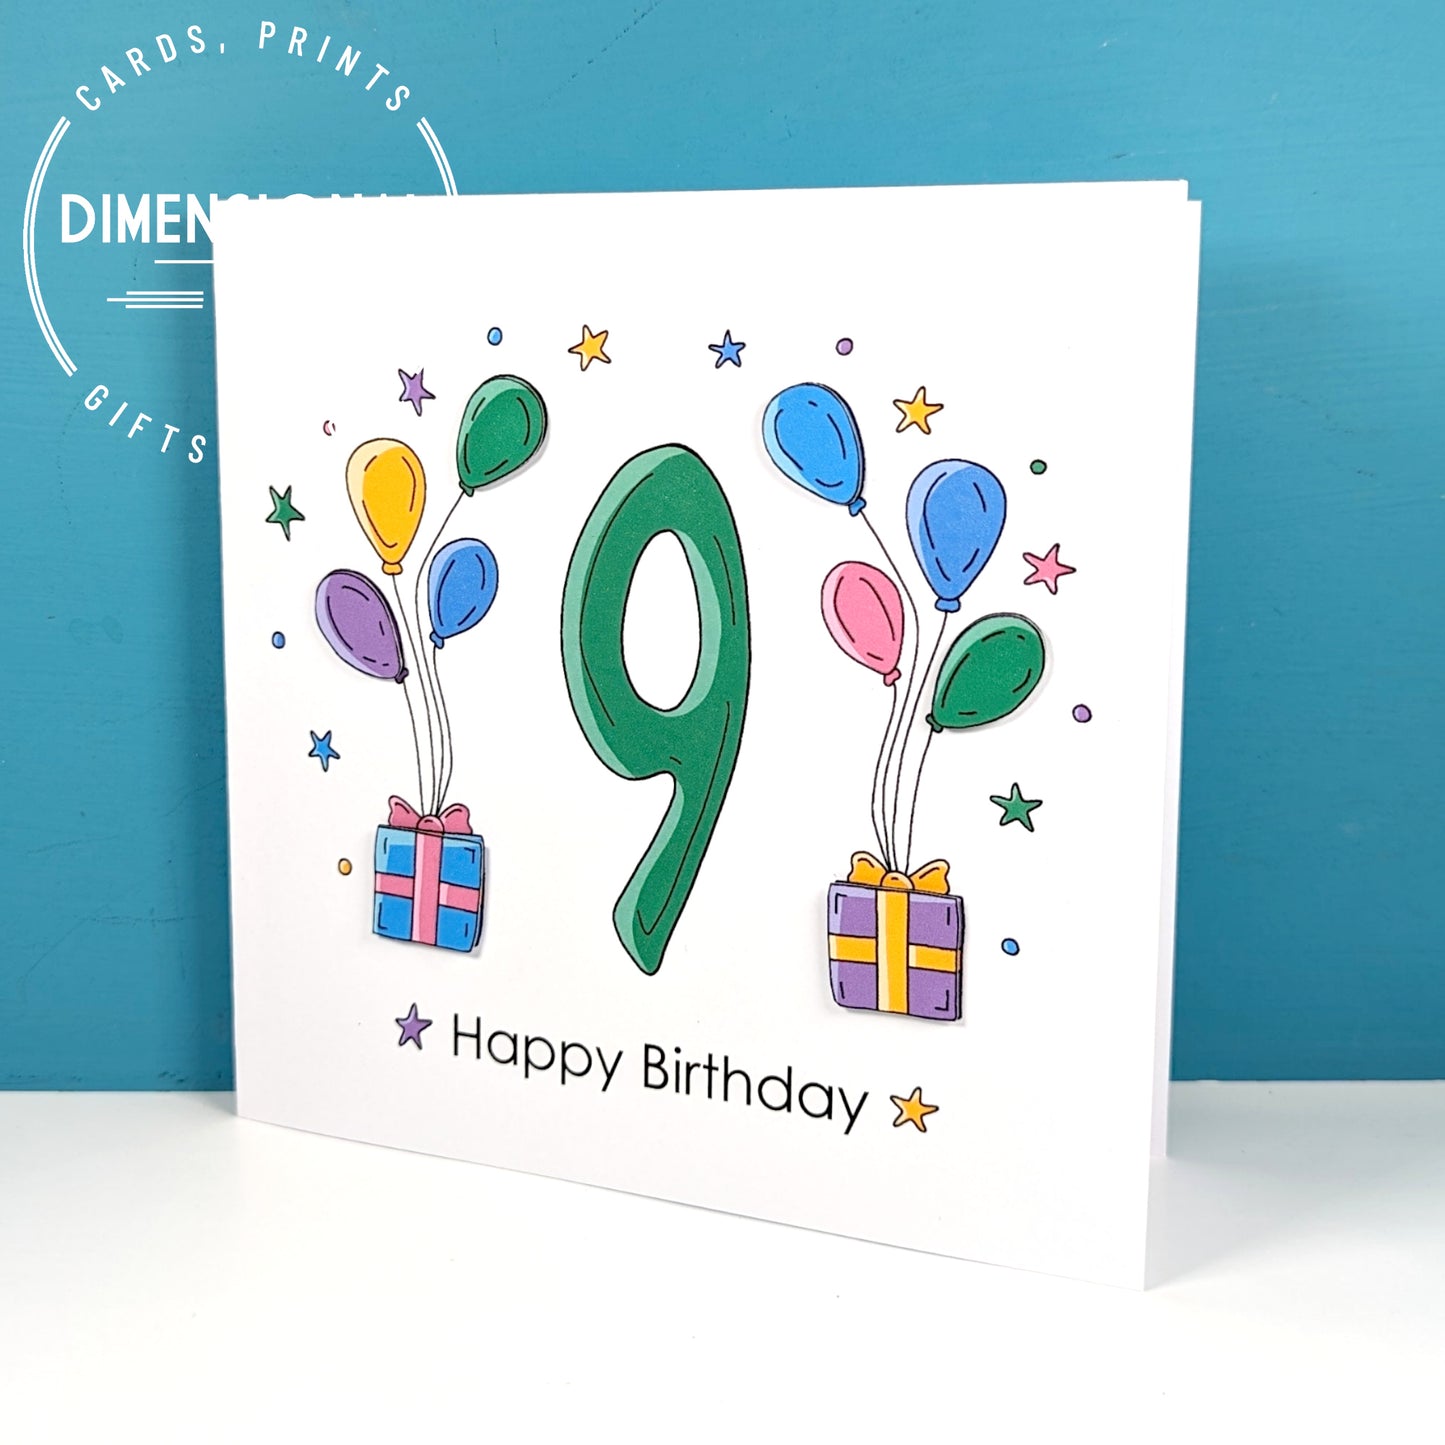 9th balloons and presents Birthday Card